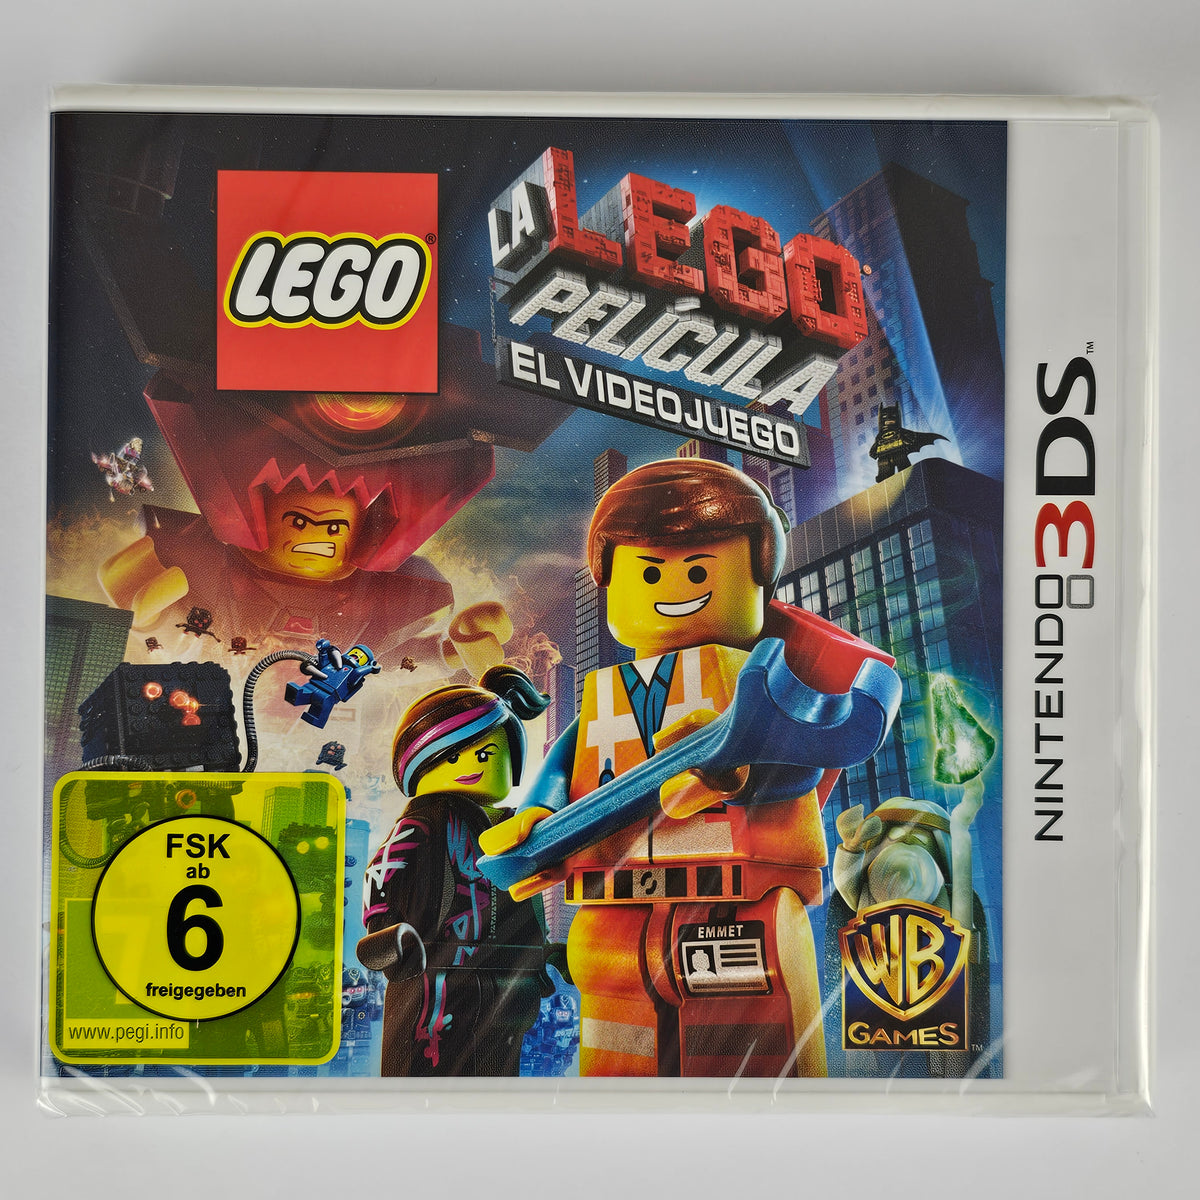 Lego Movie: Videogame [3DS]